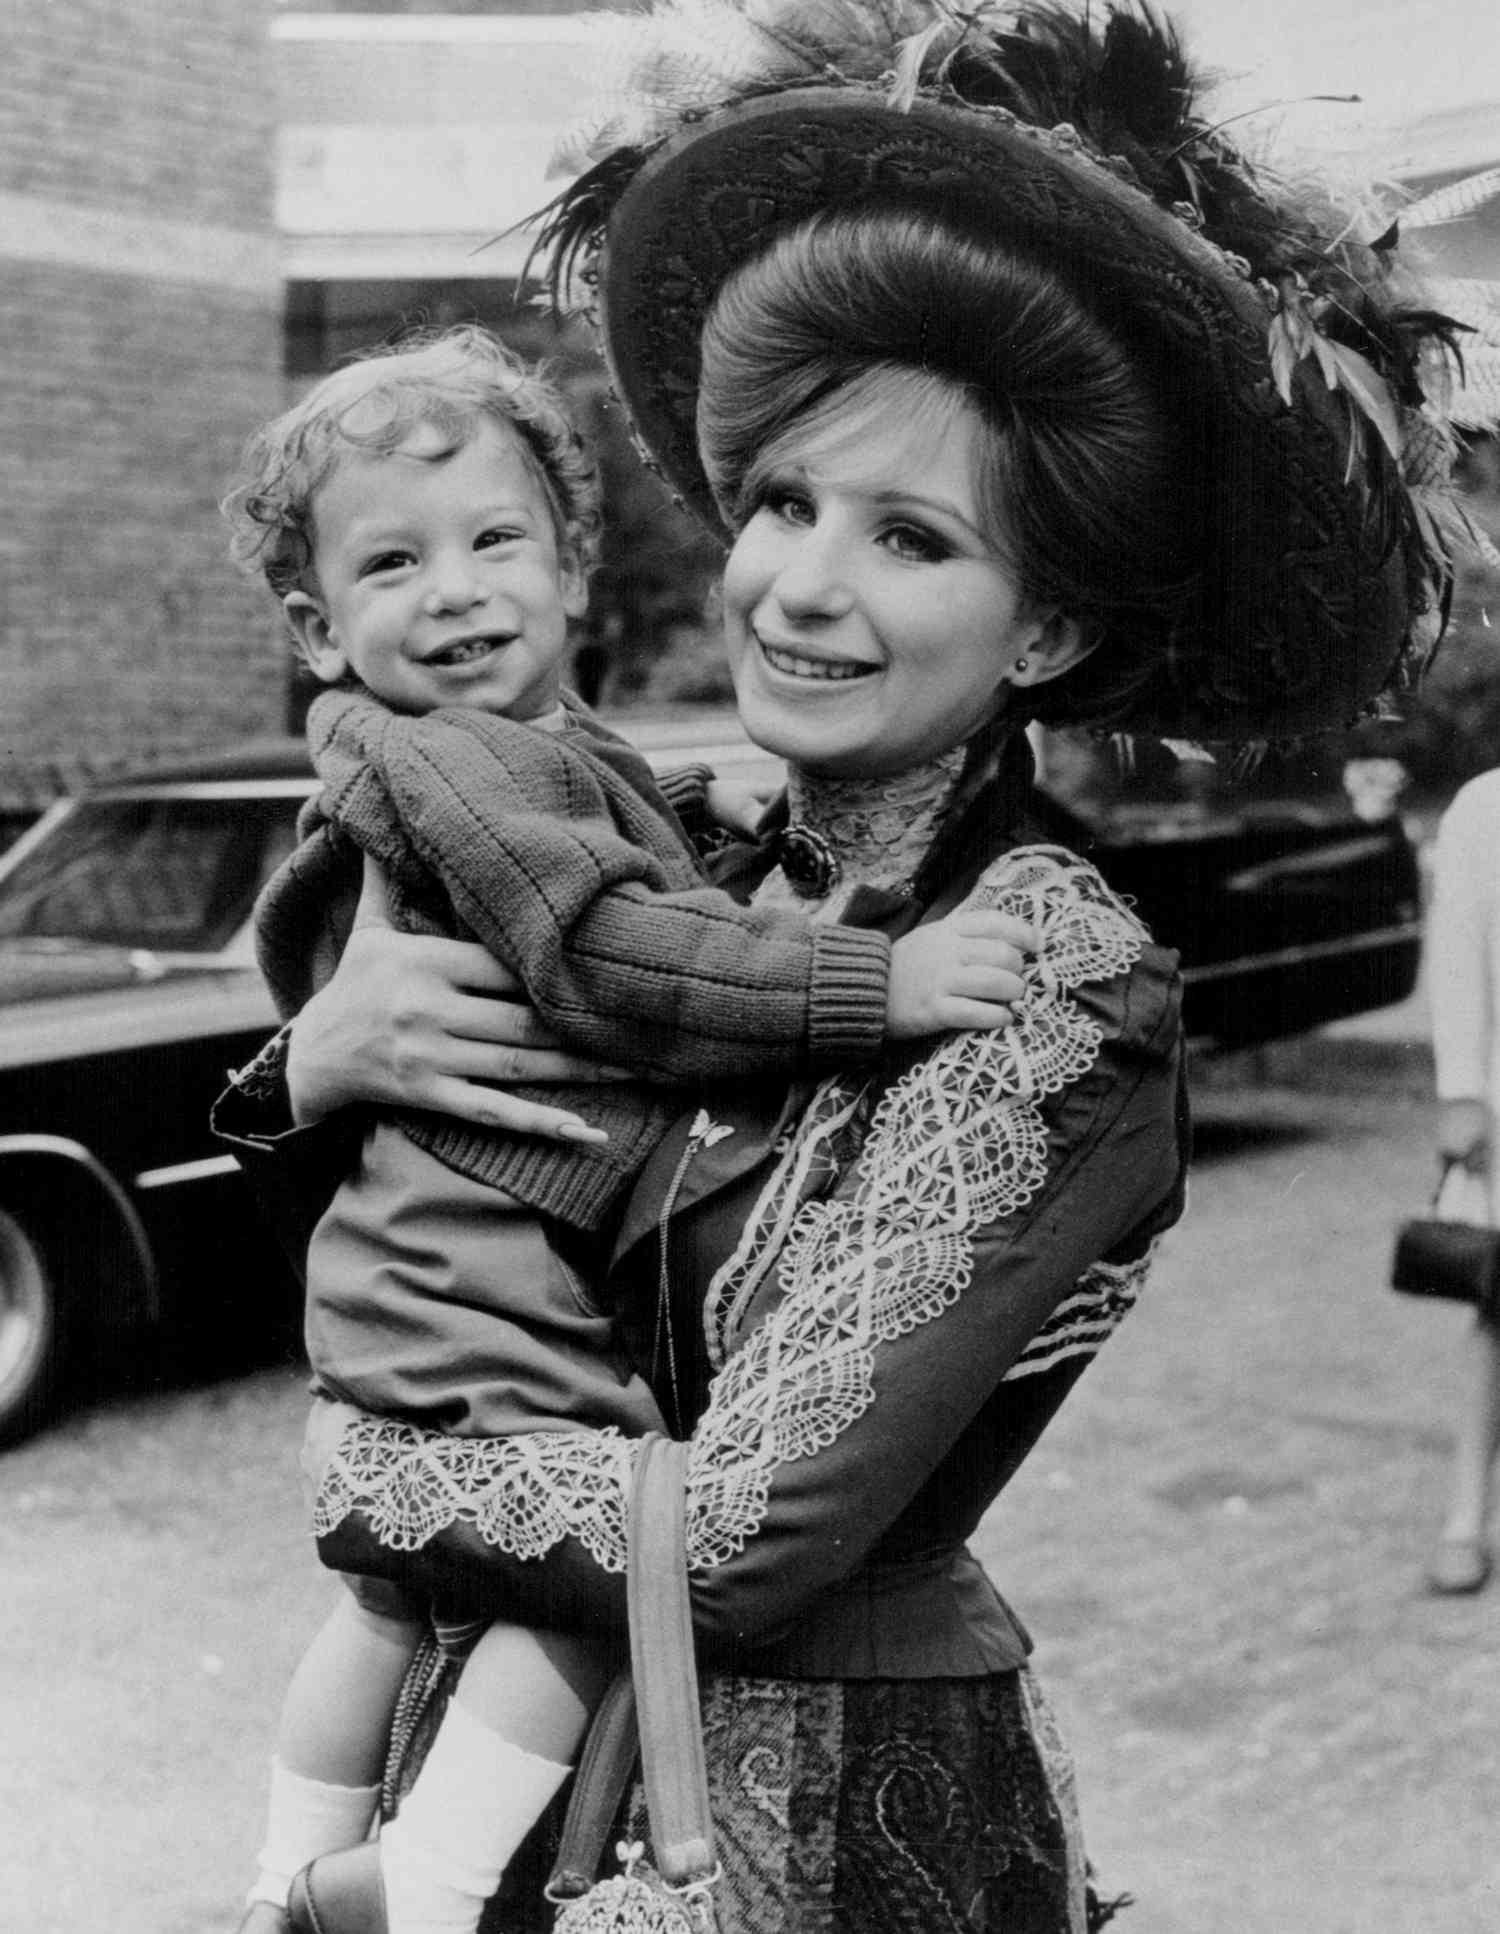 Barbra Streisand, with her son Jason Gould, on the set of the movie 'Hello, Dolly!', 1969